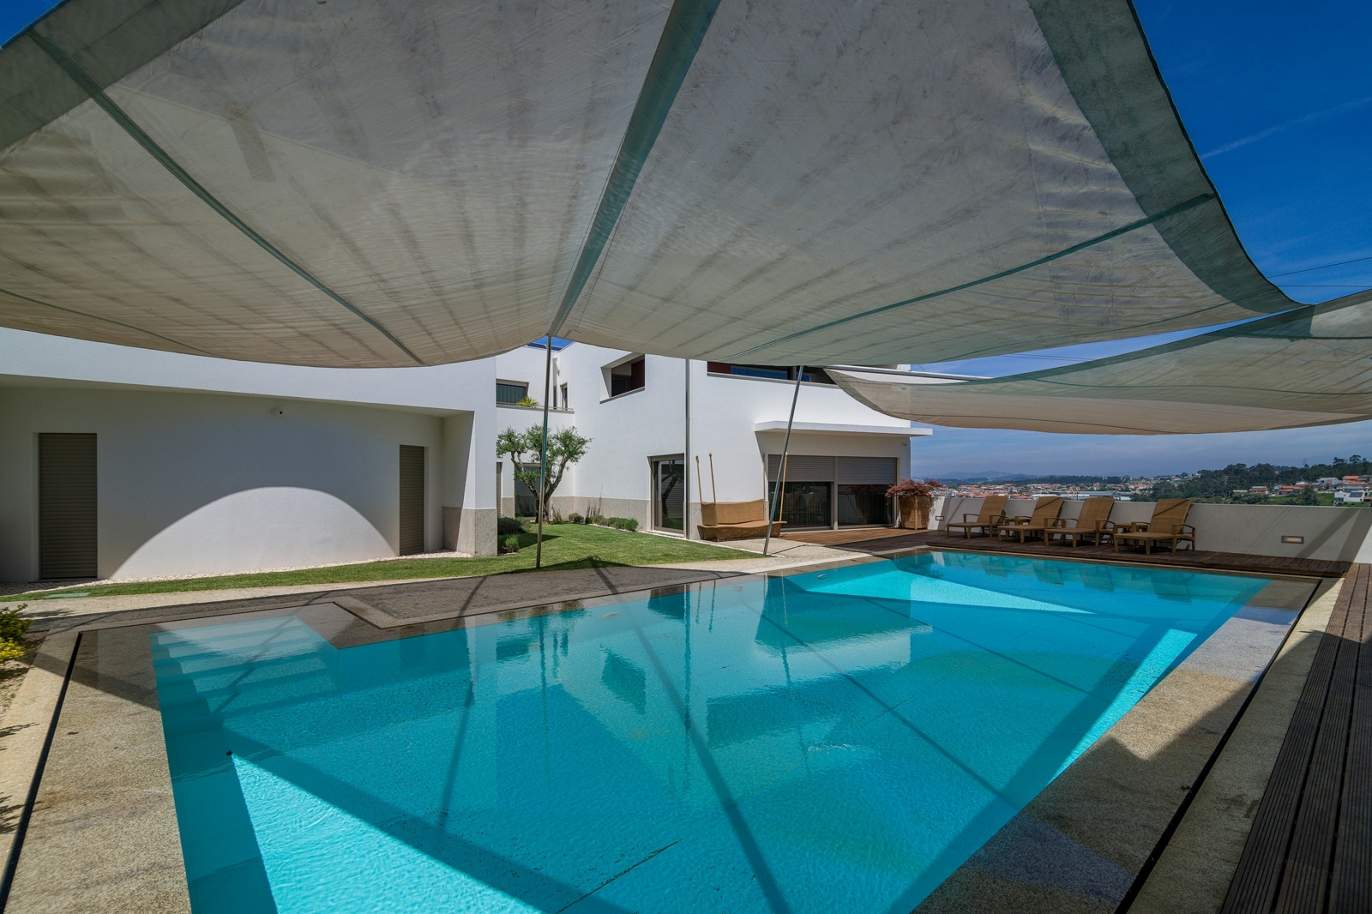 3 Bedroom Villa, with pool and garden, for sale, at Trofa, Porto, Portugal_154946